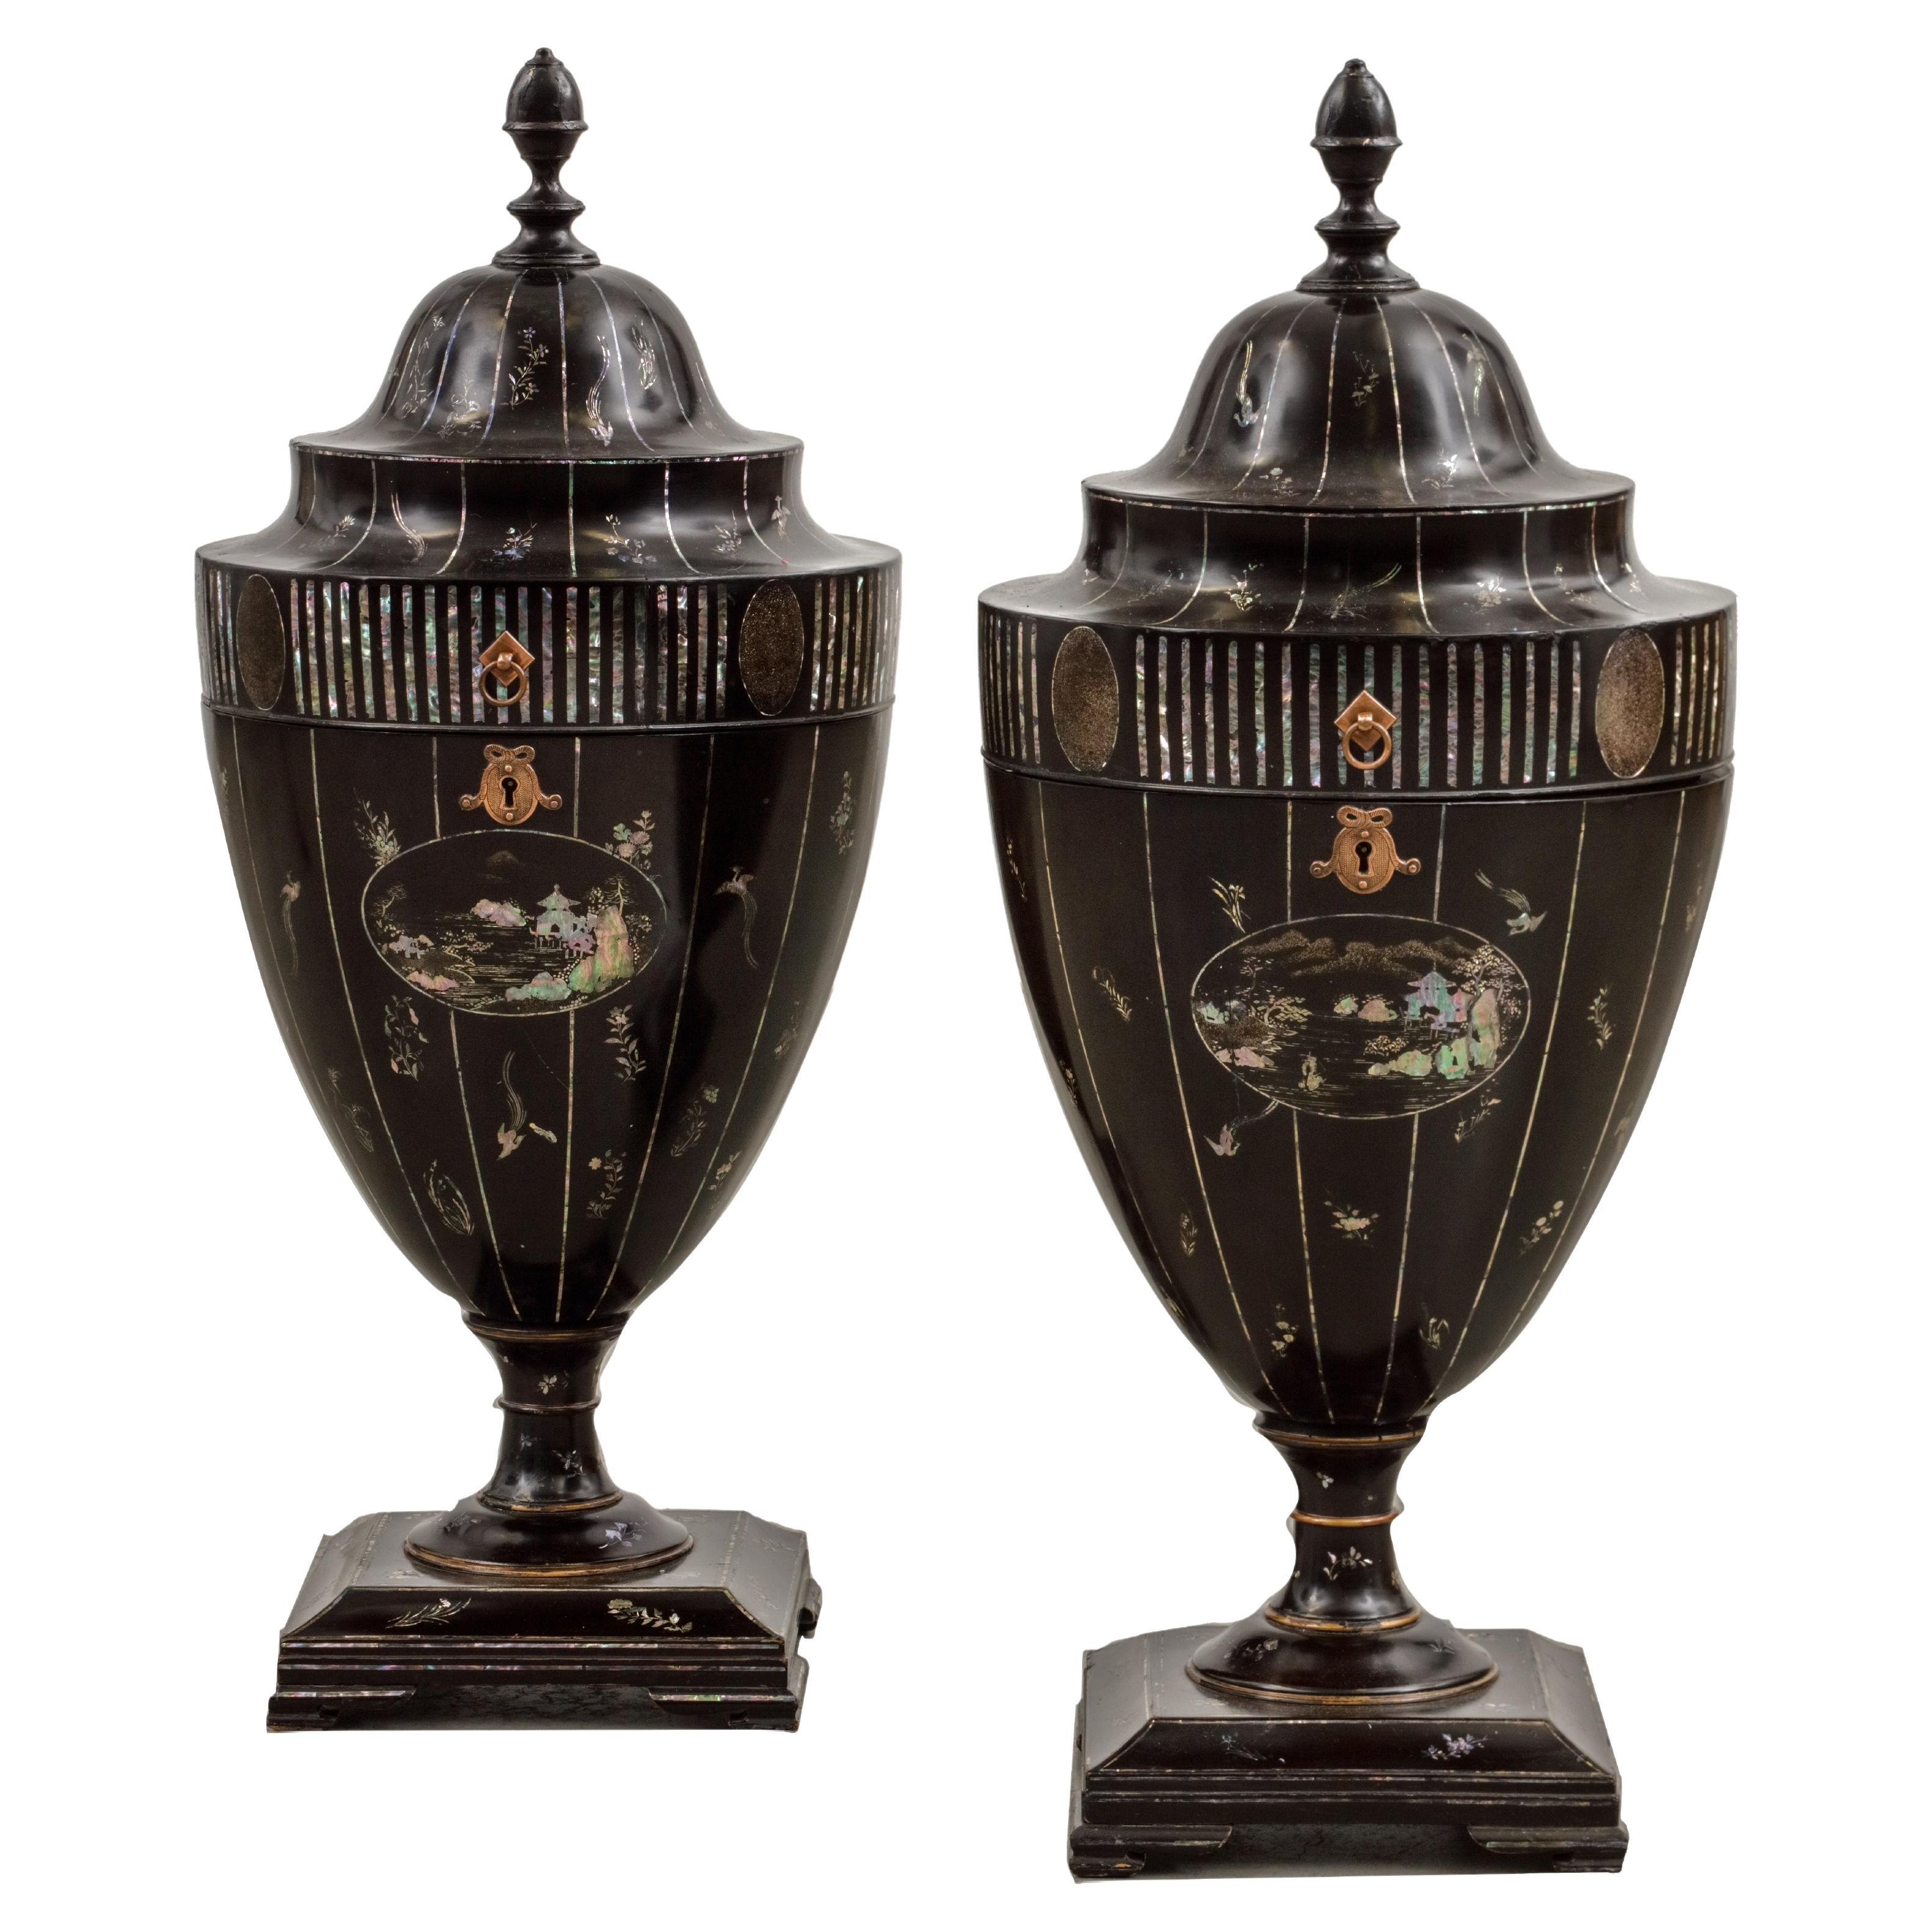 Pair of Japanese Lacquer and Mother-of-Pearl Inlaid Knife Urns, circa 1800-1815